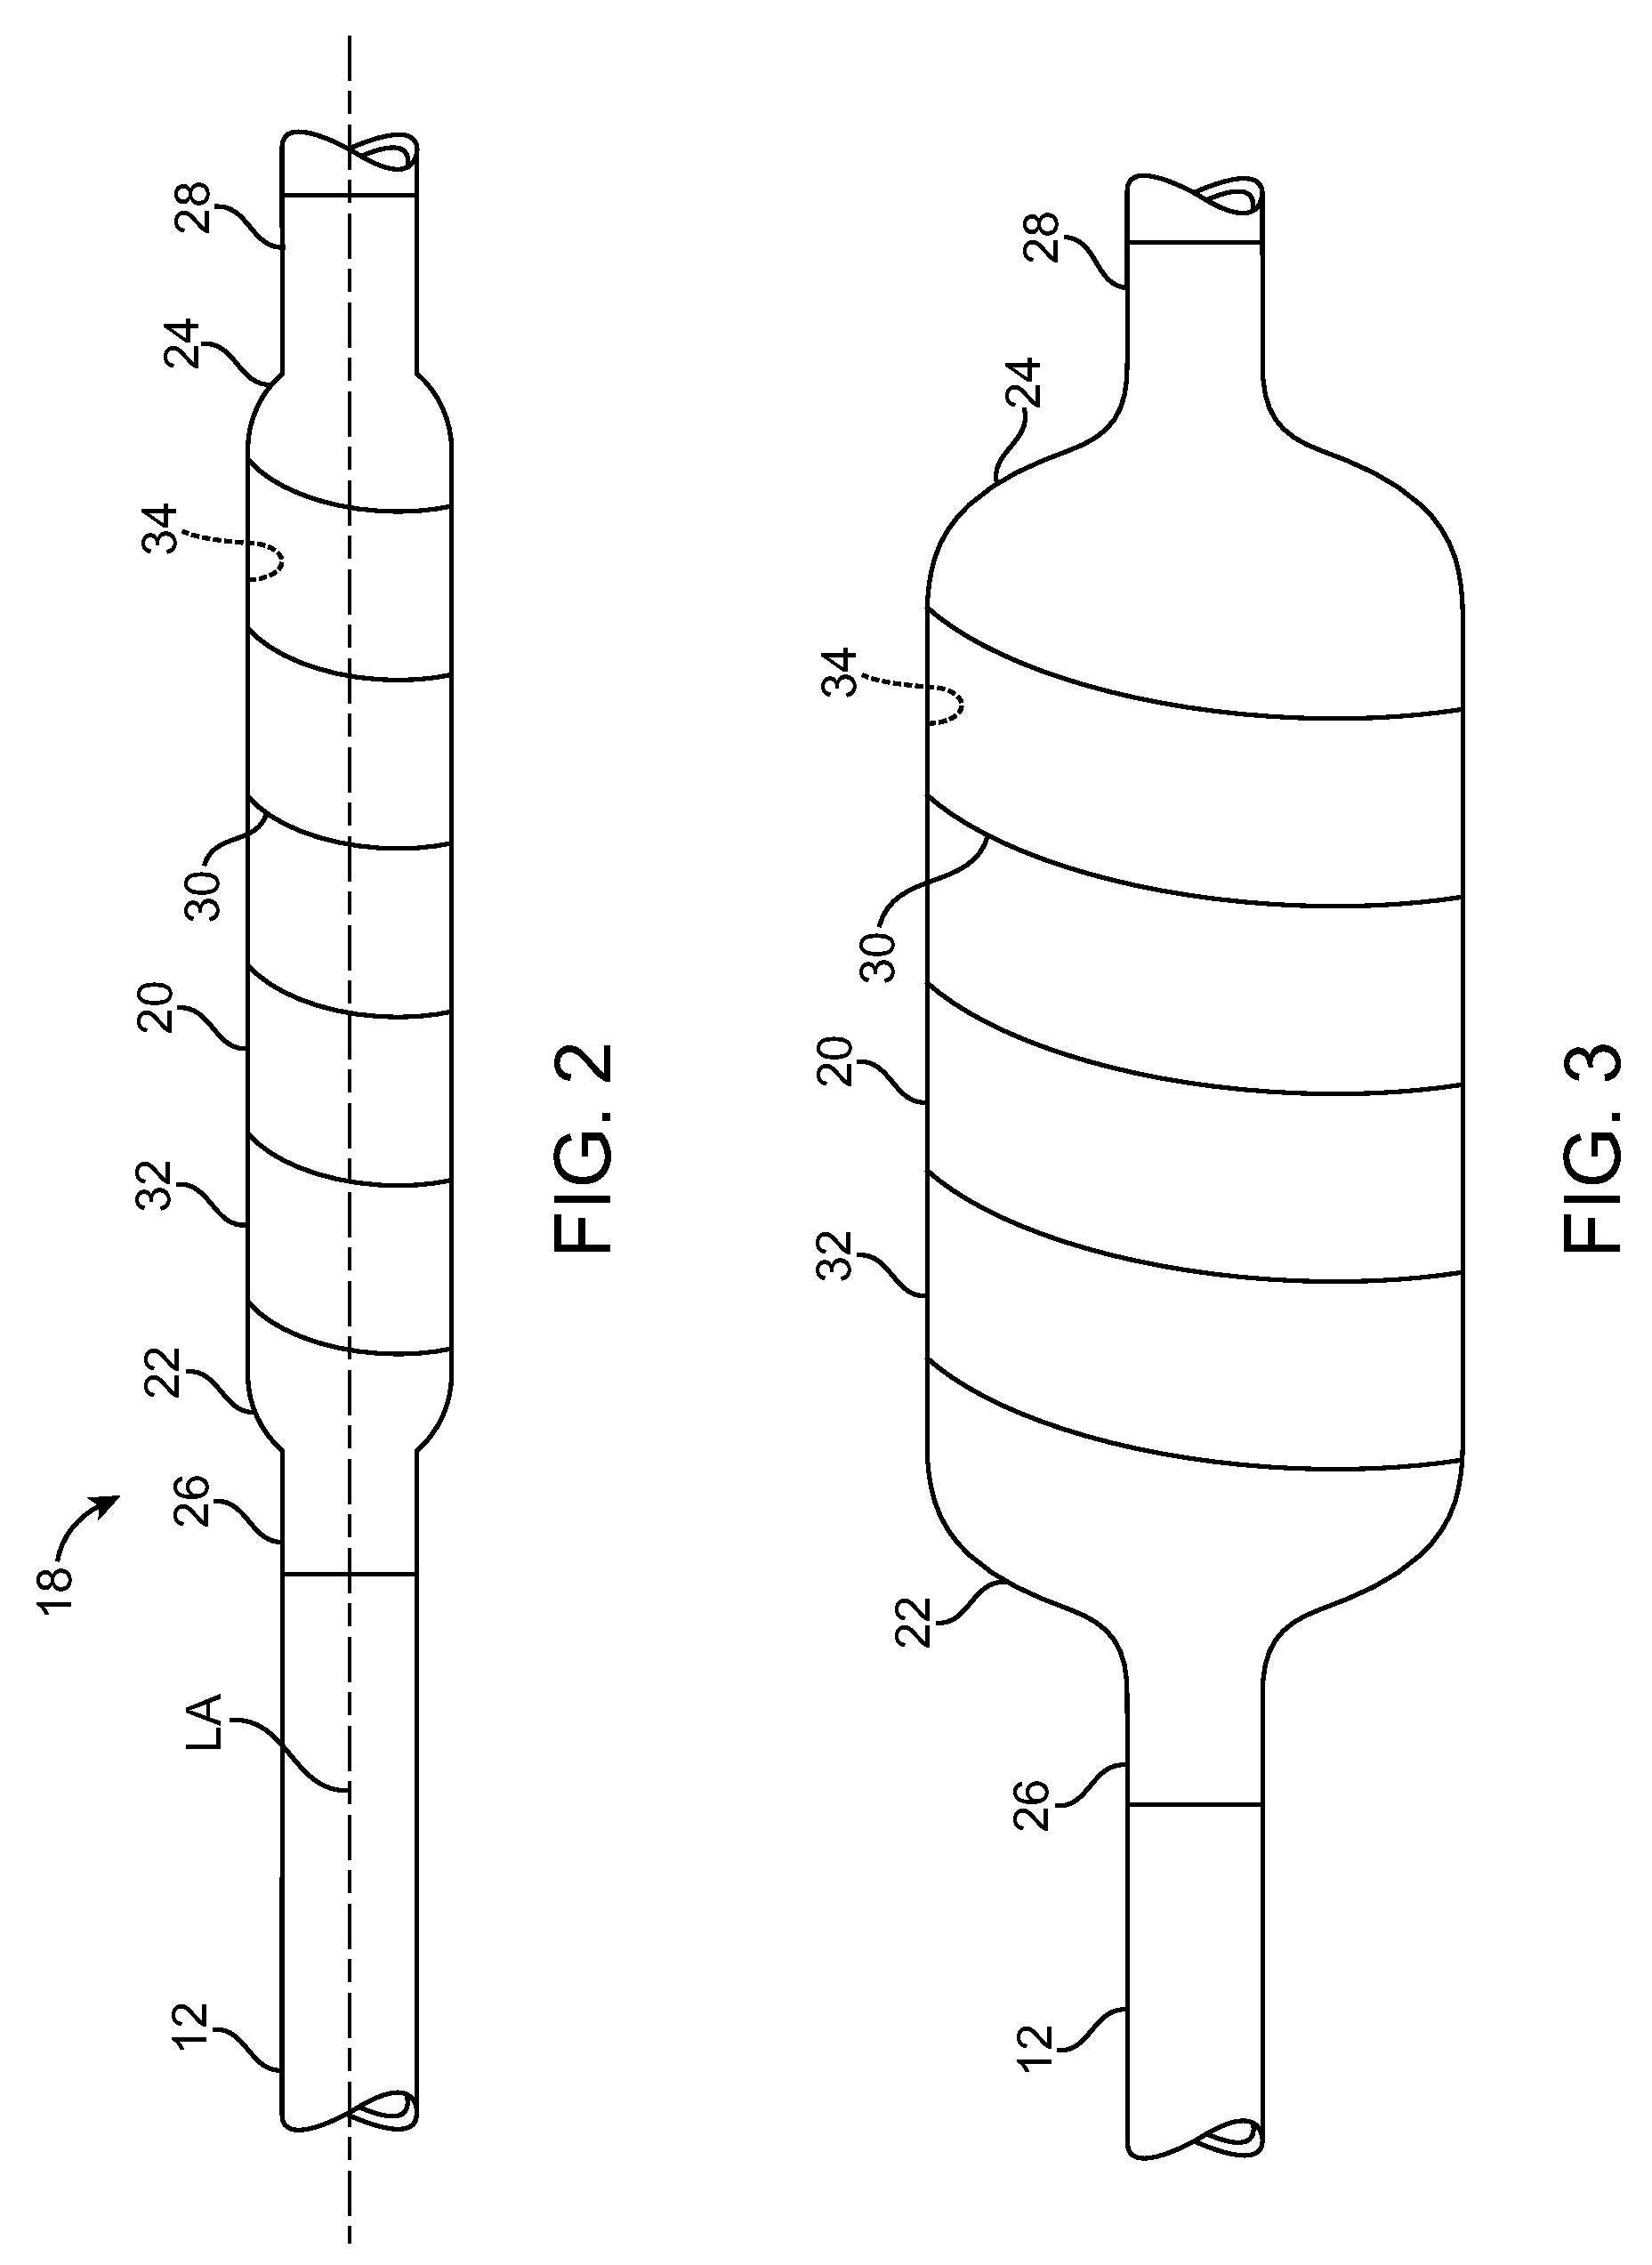 Balloons Having Improved Strength and Methods for Making Same